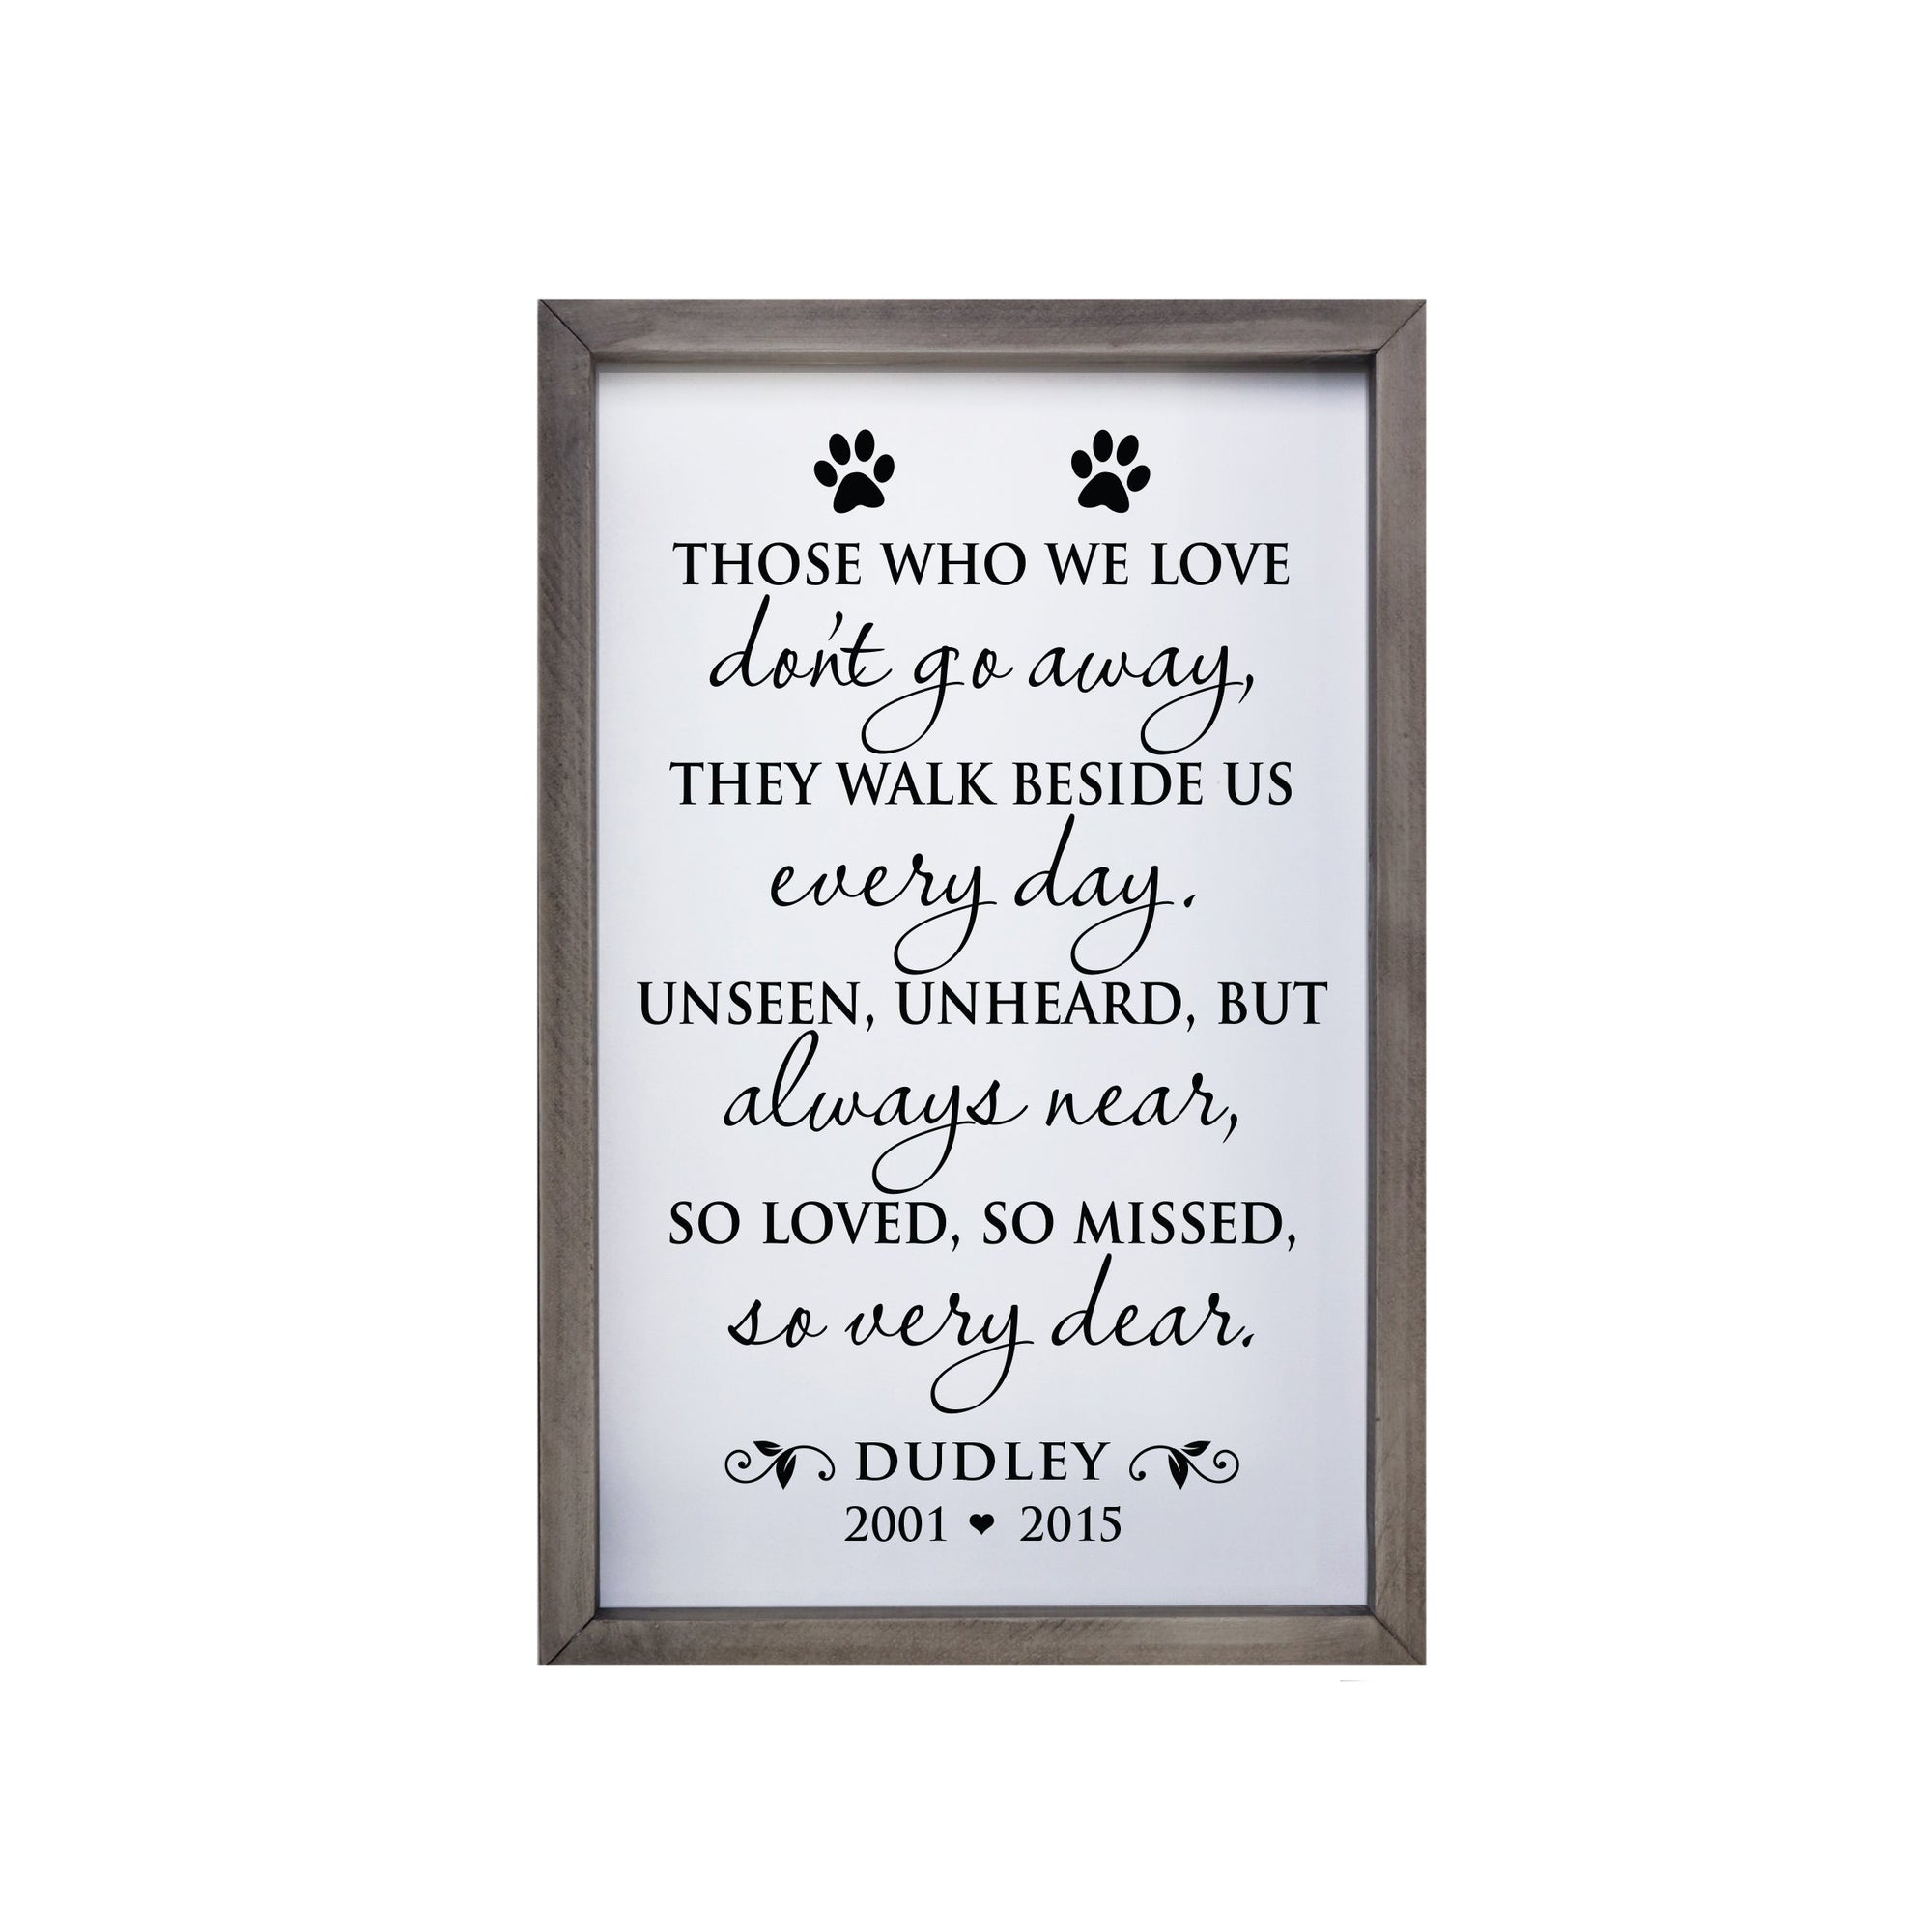 10x7 Grey Framed Pet Memorial Shadow Box with phrase "Those Who We Love Don't Go Away"